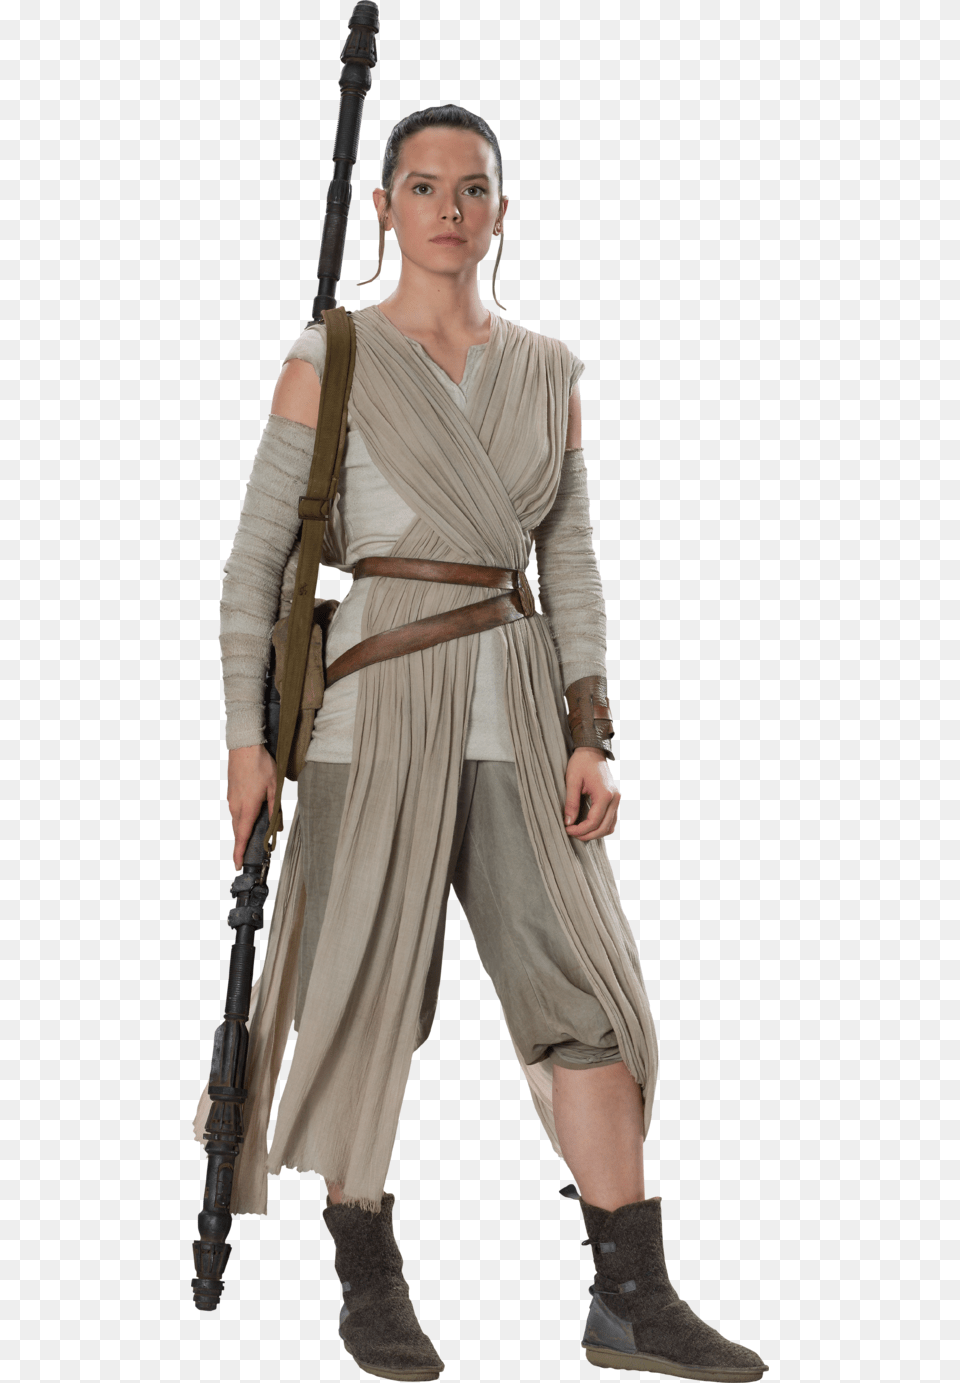 Ray Star Wars Ep7 The Force Awakens Characters Cut Rey De Star Wars, Clothing, Weapon, Sword, Sleeve Png